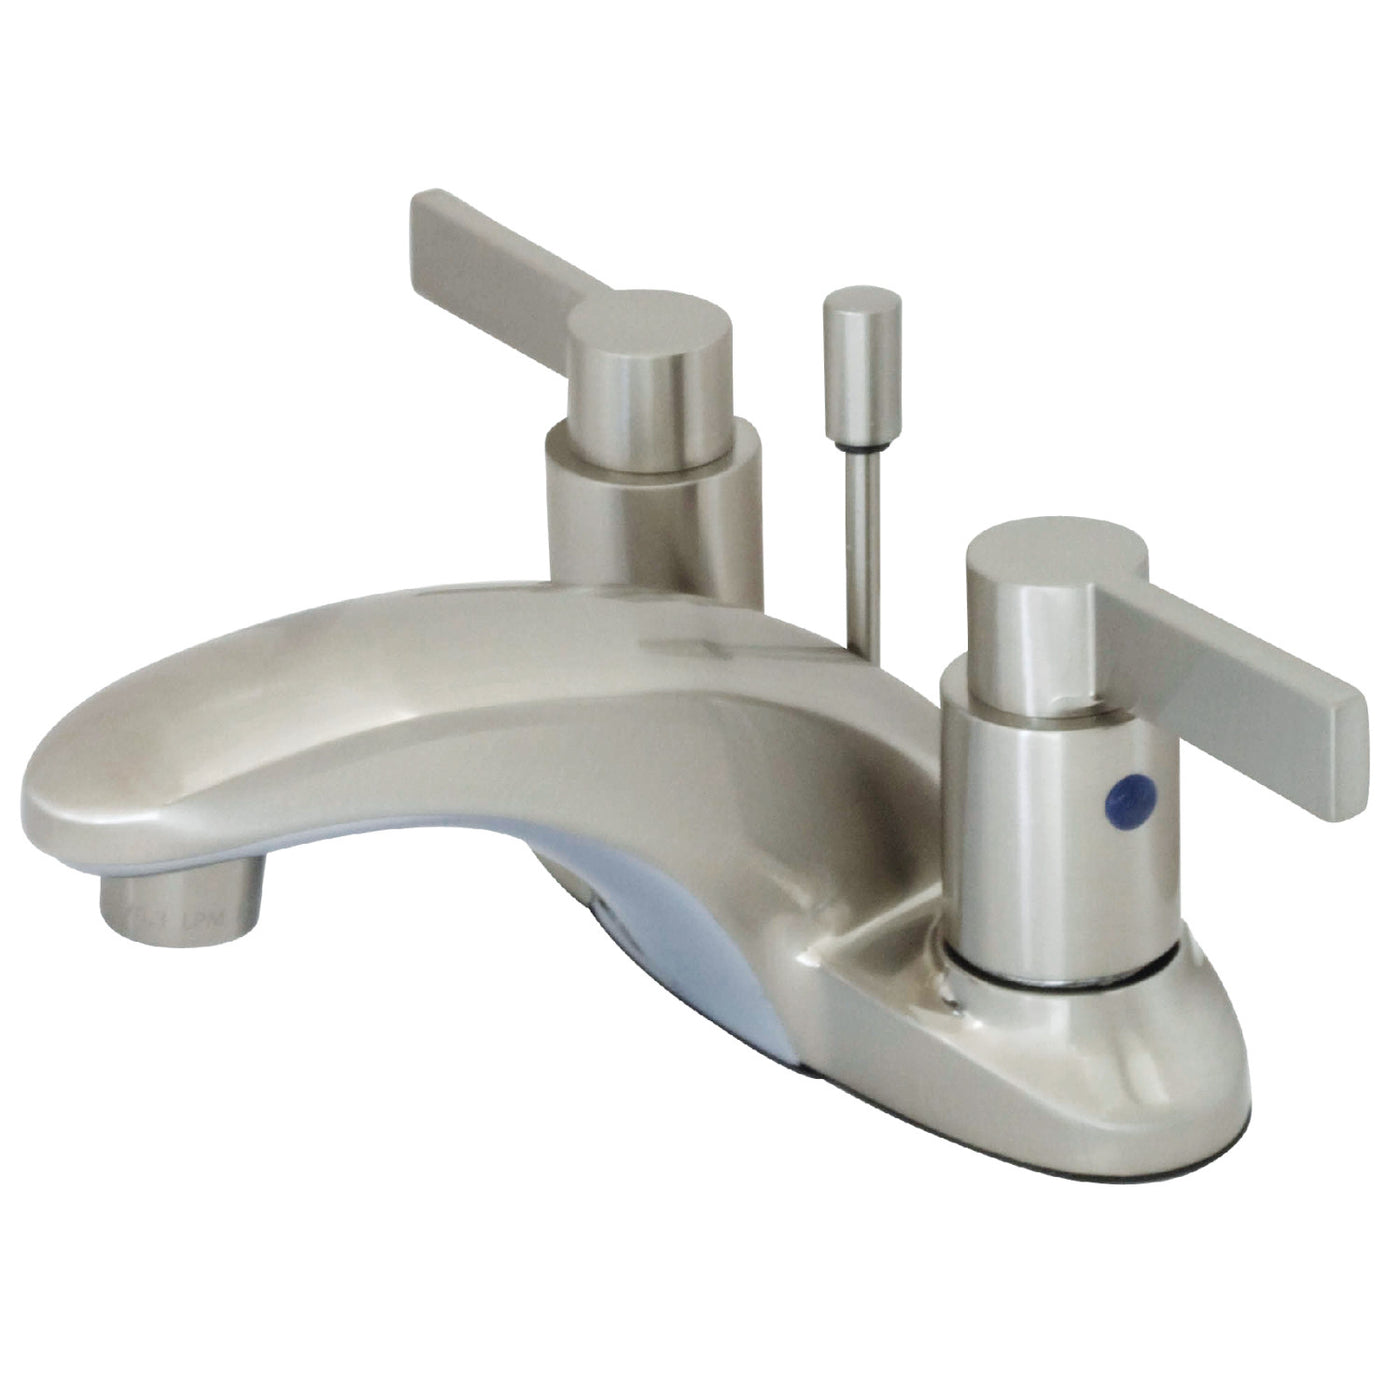 Elements of Design EB8628NDL 4-Inch Centerset Bathroom Faucet with Retail Pop-Up, Brushed Nickel